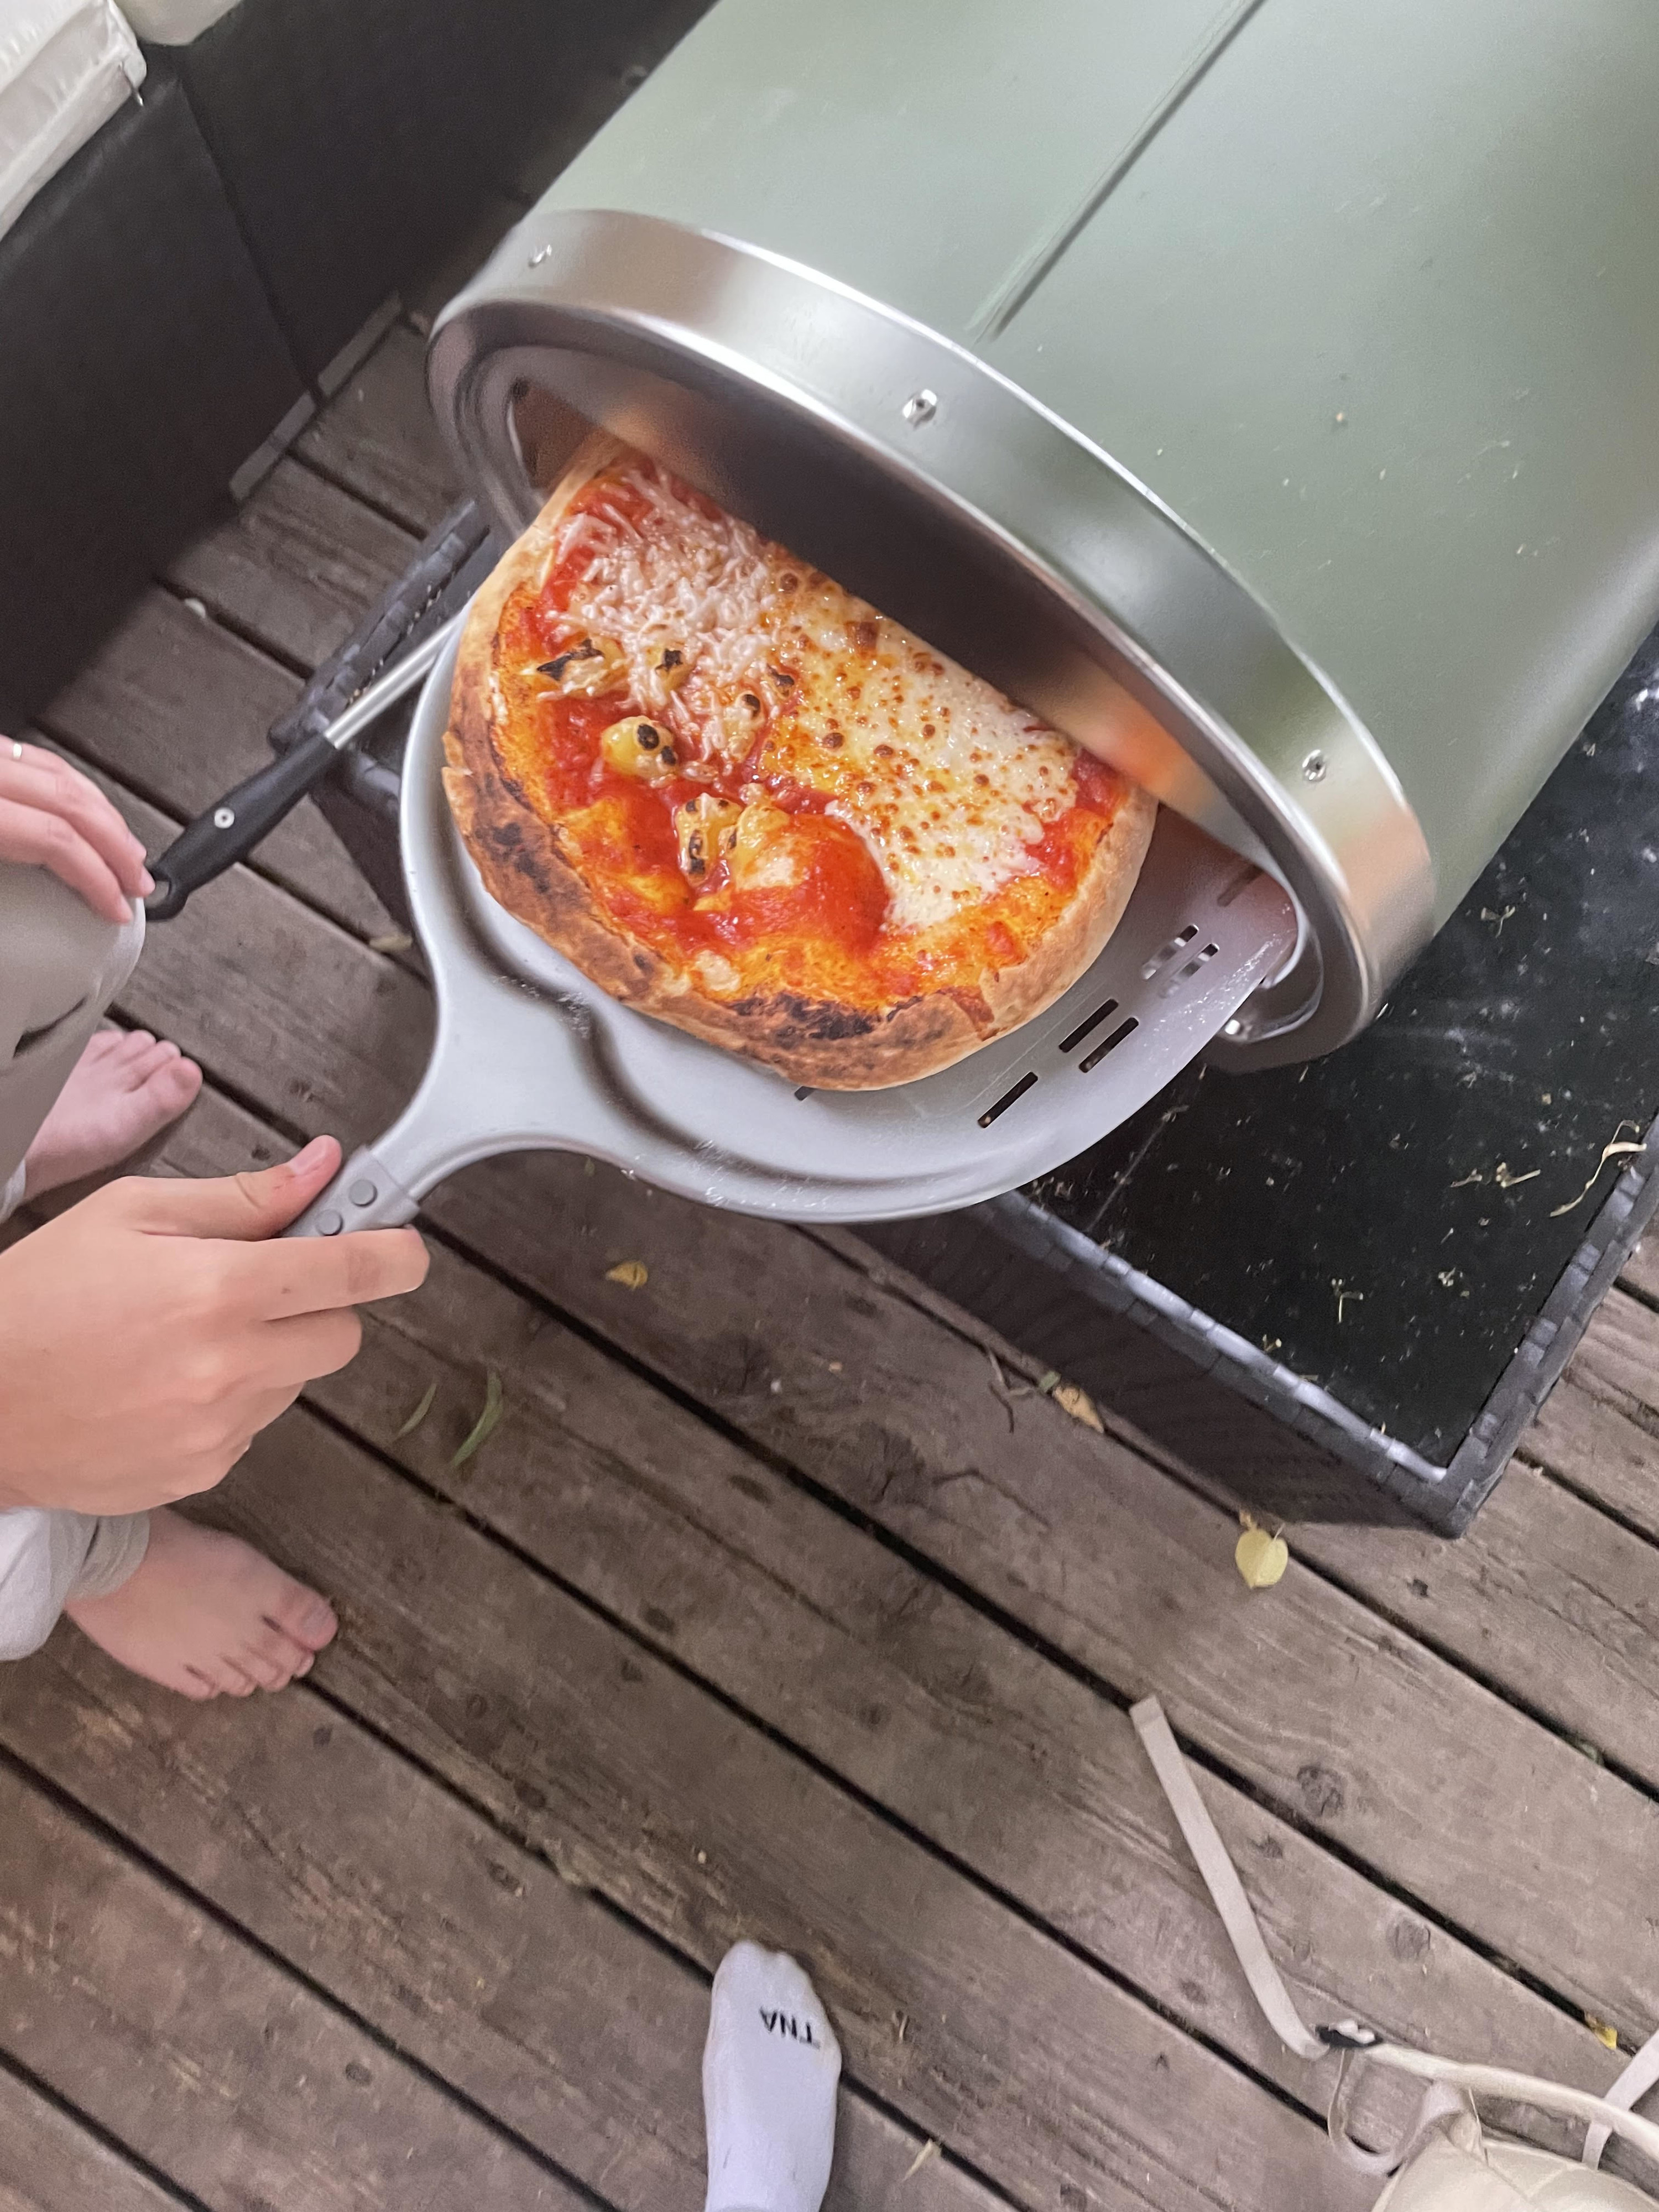 A person removing a pizza from the oven